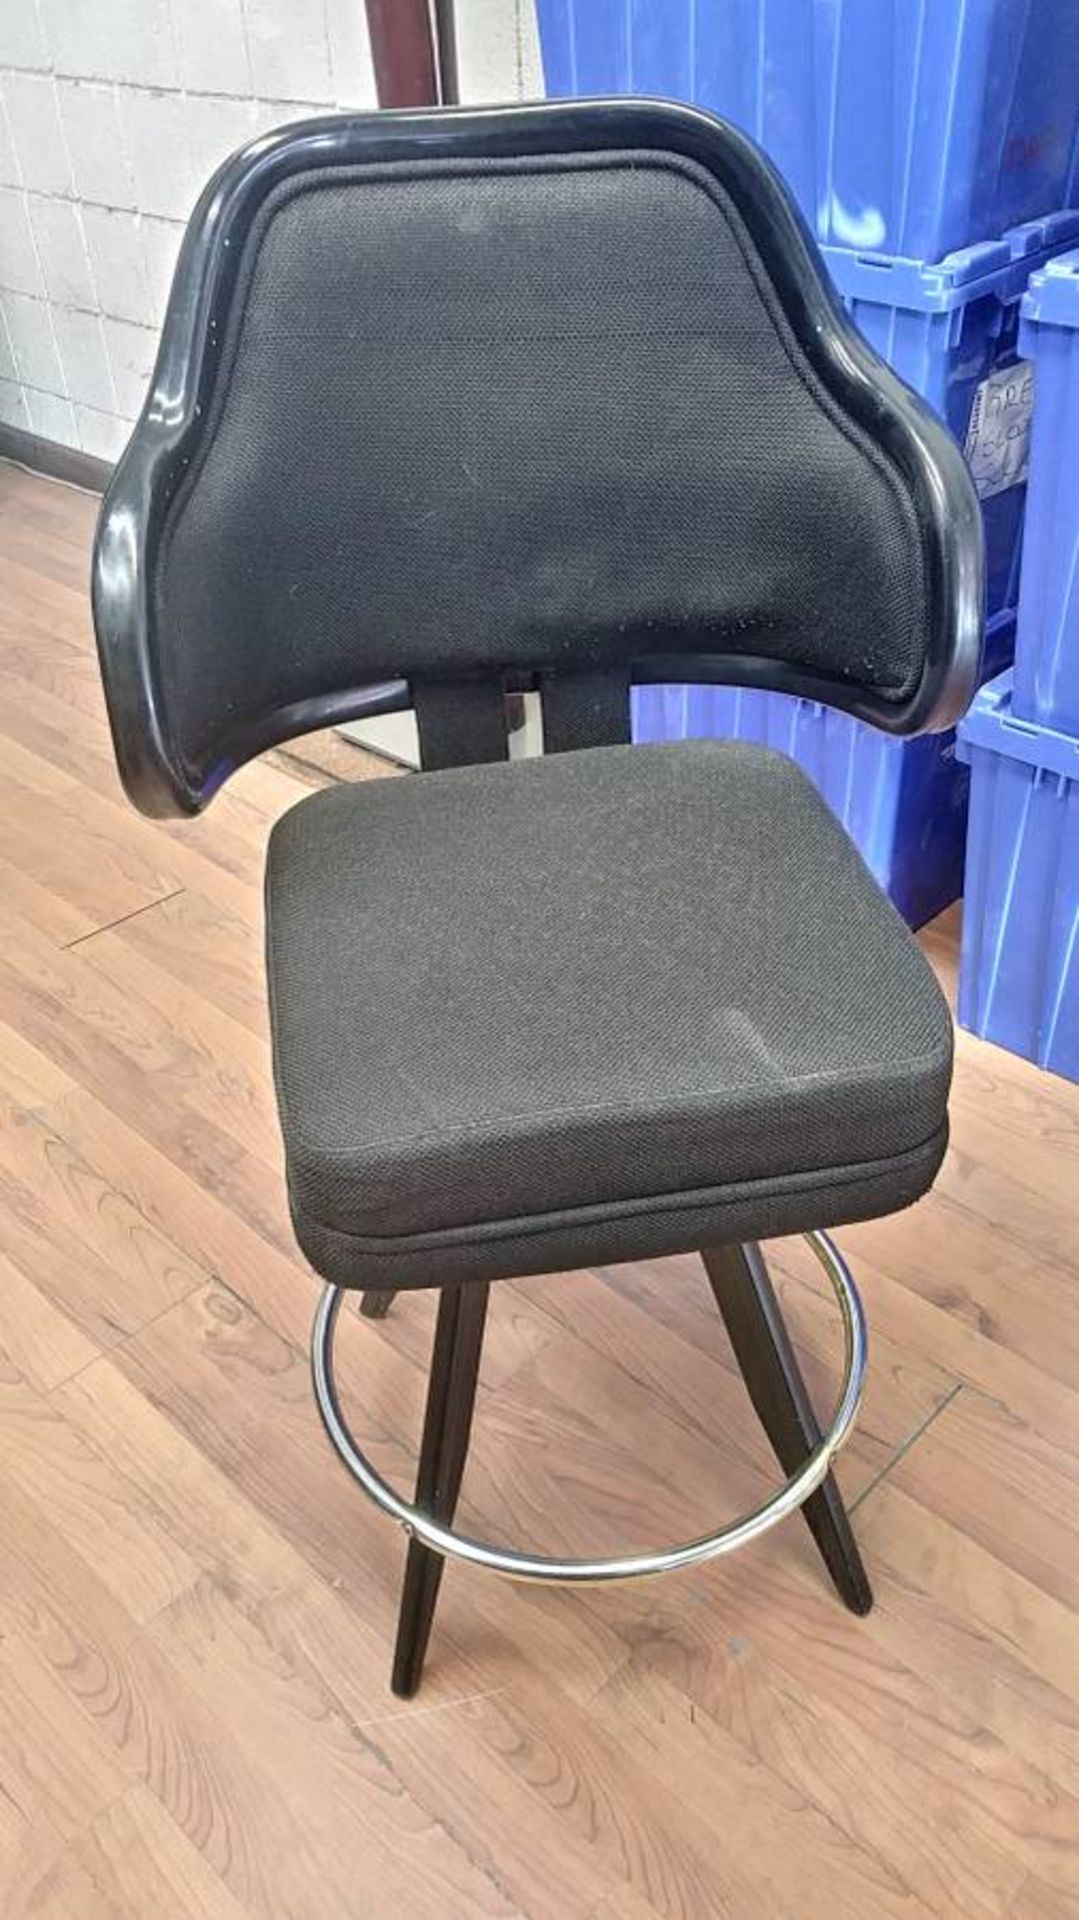 BLACK LOUNGE CHAIRS (SHORT STOOLS) W/ ARM & FOOTREST (X MONEY) (40" TOTAL H X 24" H FROM SEAT..)